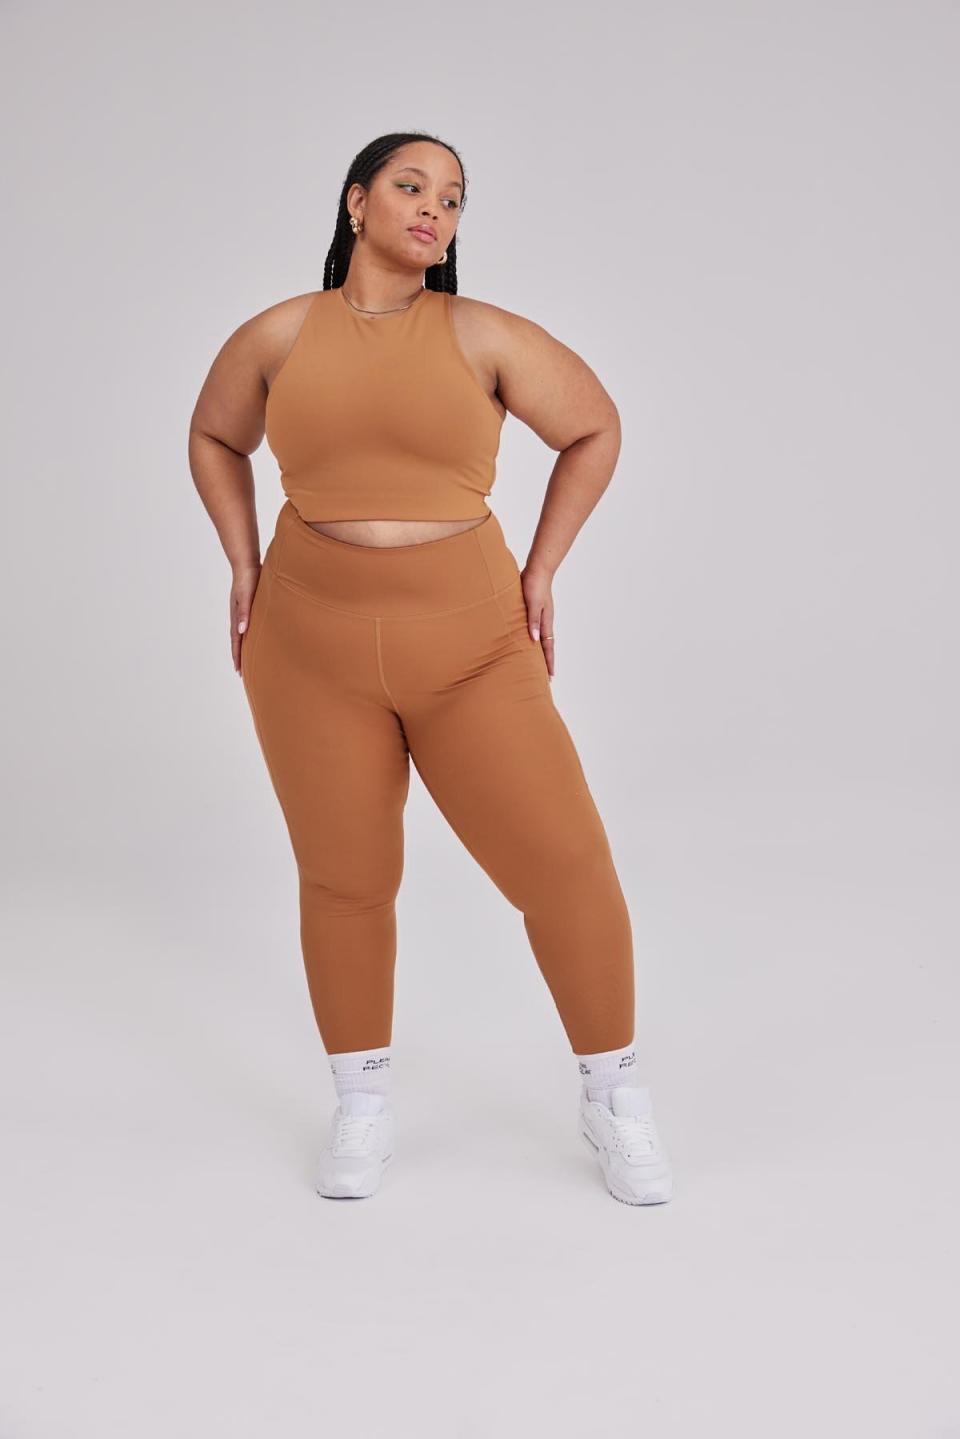 "It's a little embarrassing how many pairs of these I've purchased over the past year &mdash; I just love them so much. The stretchy material is perfect for the low-impact workouts I favor these days and they look put-together to wear the whole day. I love the colors and the fit, too." &mdash; Jamie, New York City<br /><br /><strong><a href="https://www.girlfriend.com/collections/spring-meadow/products/ivy-compressive-high-rise-legging?variant=33370152009791" target="_blank" rel="noopener noreferrer">Get the Girlfriend Collective compressive high rise leggings for $68</a>.</strong>